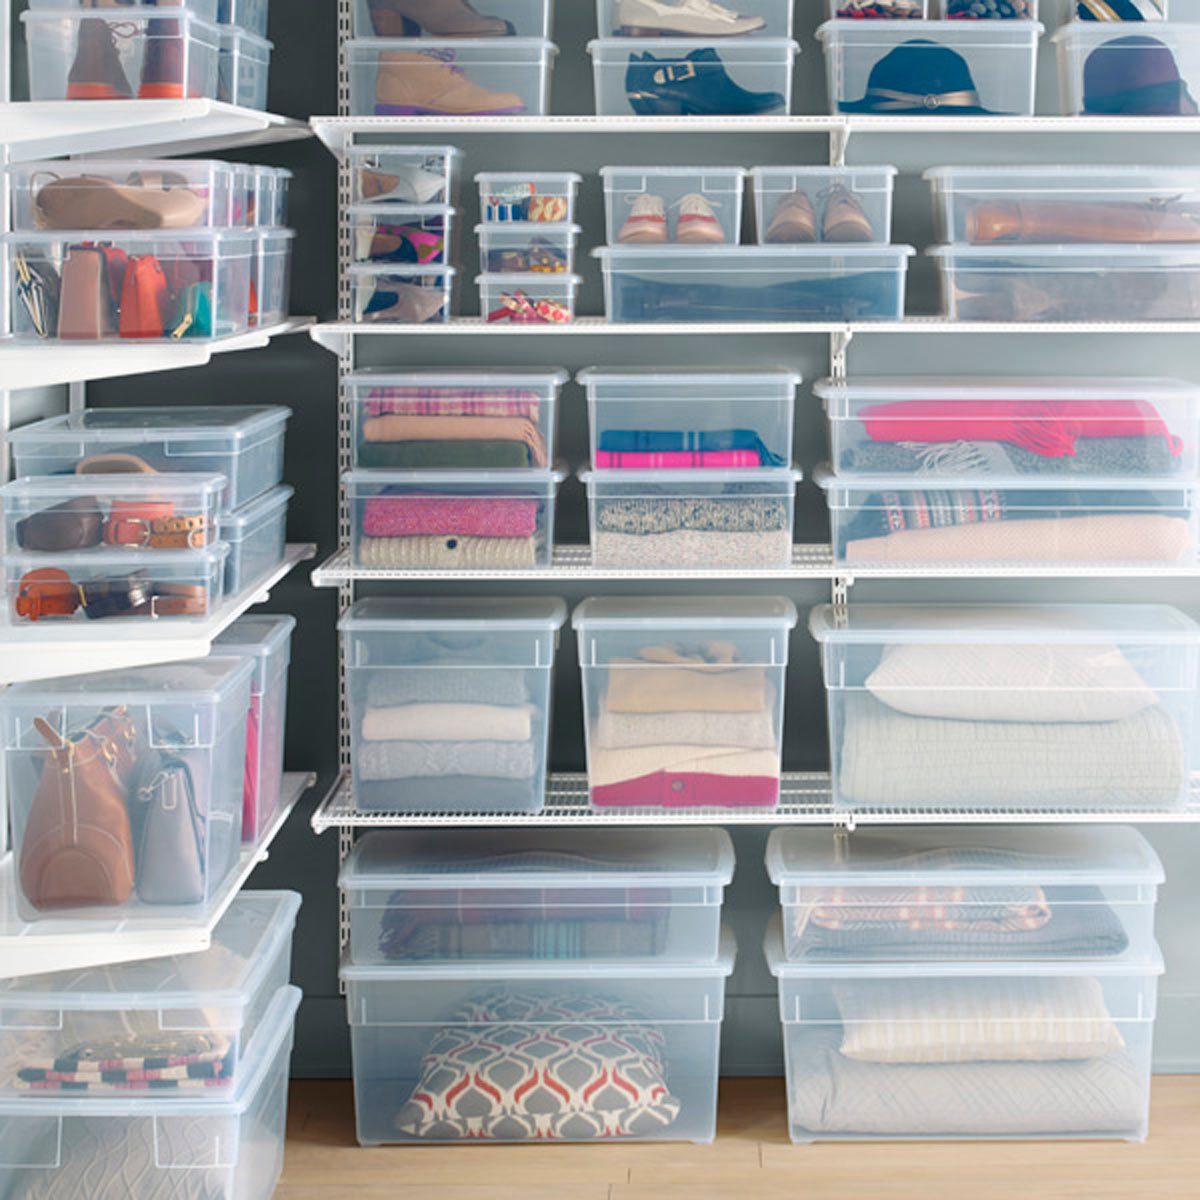 5 Signs It's Time to Replace Your Plastic Storage Containers